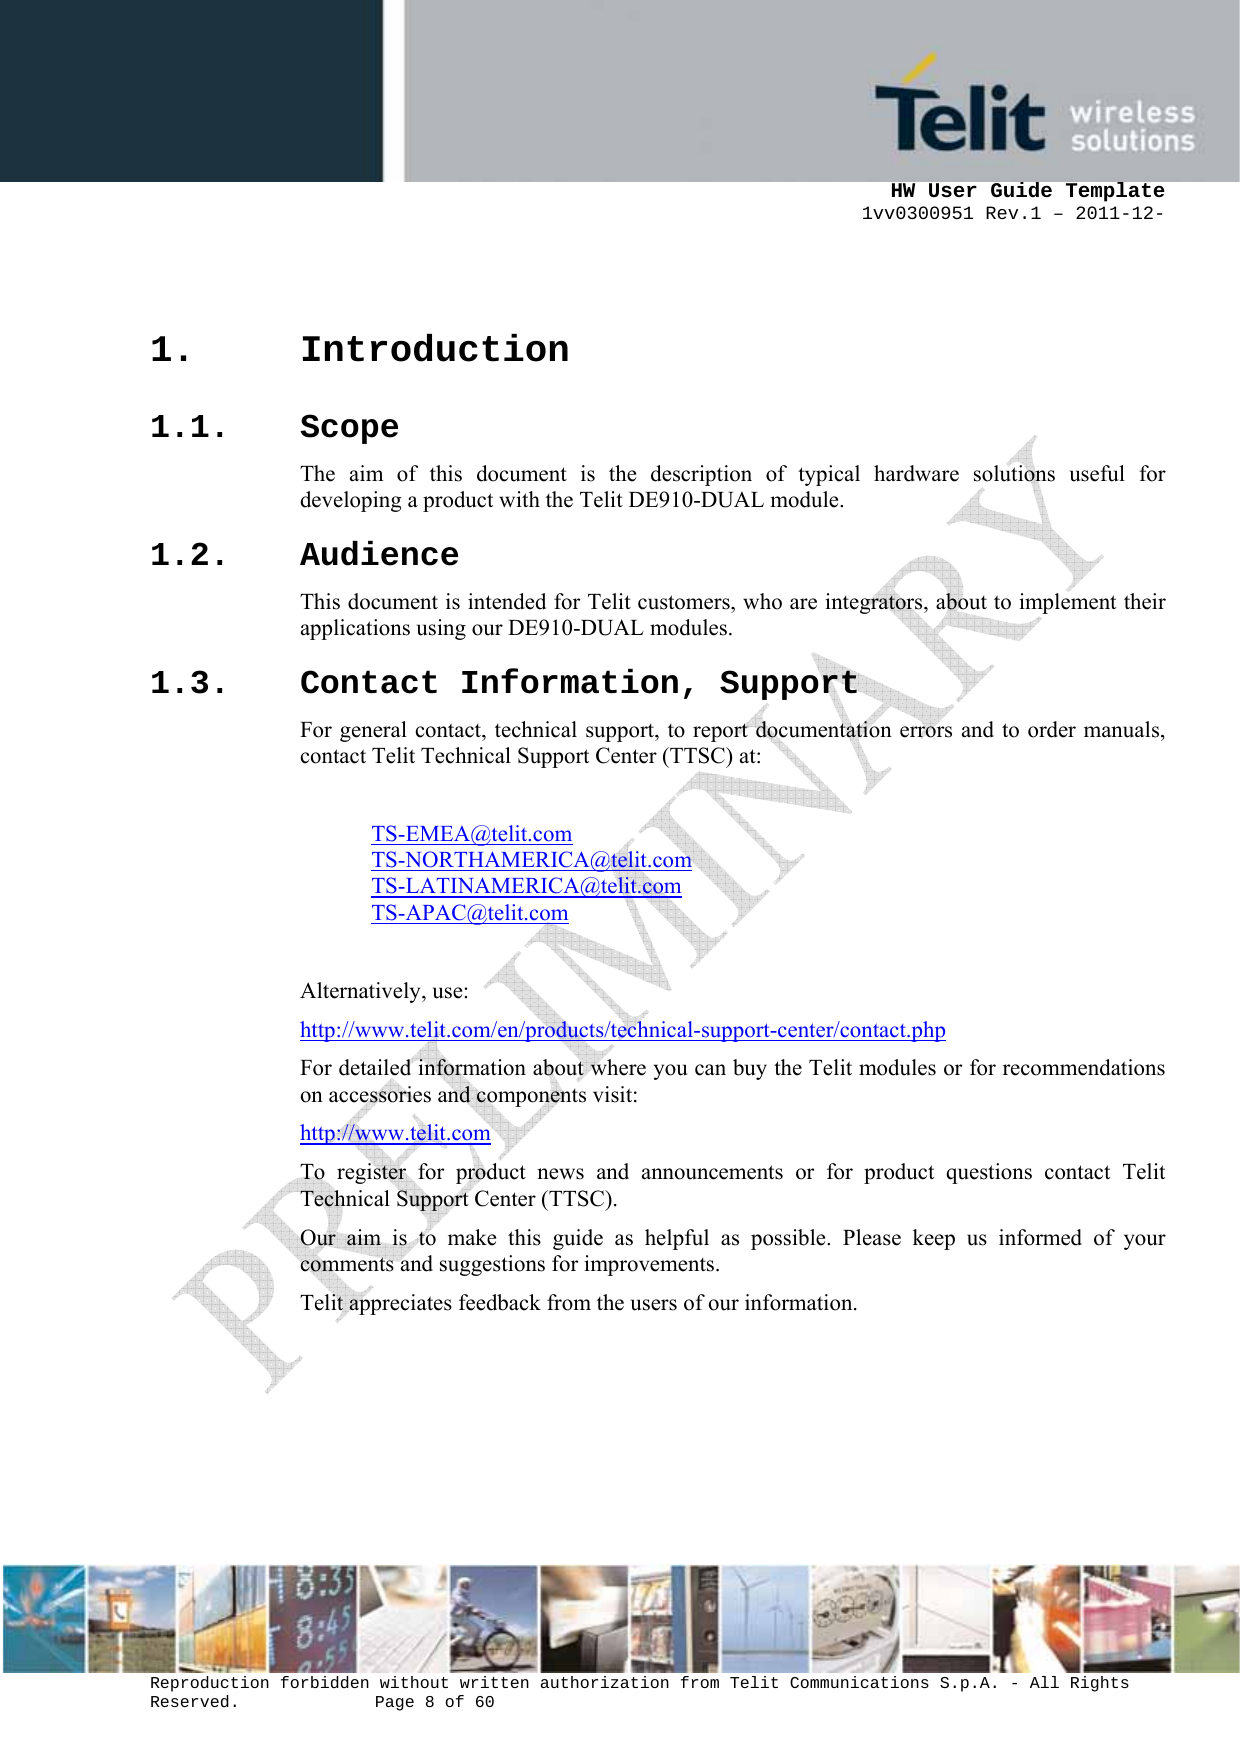      HW User Guide Template 1vv0300951 Rev.1 – 2011-12-  Reproduction forbidden without written authorization from Telit Communications S.p.A. - All Rights Reserved.    Page 8 of 60                                                     1. Introduction 1.1. Scope The aim of this document is the description of typical hardware solutions useful for developing a product with the Telit DE910-DUAL module.  1.2. Audience This document is intended for Telit customers, who are integrators, about to implement their applications using our DE910-DUAL modules. 1.3. Contact Information, Support For general contact, technical support, to report documentation errors and to order manuals, contact Telit Technical Support Center (TTSC) at:  TS-EMEA@telit.com TS-NORTHAMERICA@telit.com TS-LATINAMERICA@telit.com TS-APAC@telit.com  Alternatively, use:  http://www.telit.com/en/products/technical-support-center/contact.php For detailed information about where you can buy the Telit modules or for recommendations on accessories and components visit:  http://www.telit.com To register for product news and announcements or for product questions contact Telit Technical Support Center (TTSC). Our aim is to make this guide as helpful as possible. Please keep us informed of your comments and suggestions for improvements. Telit appreciates feedback from the users of our information.      